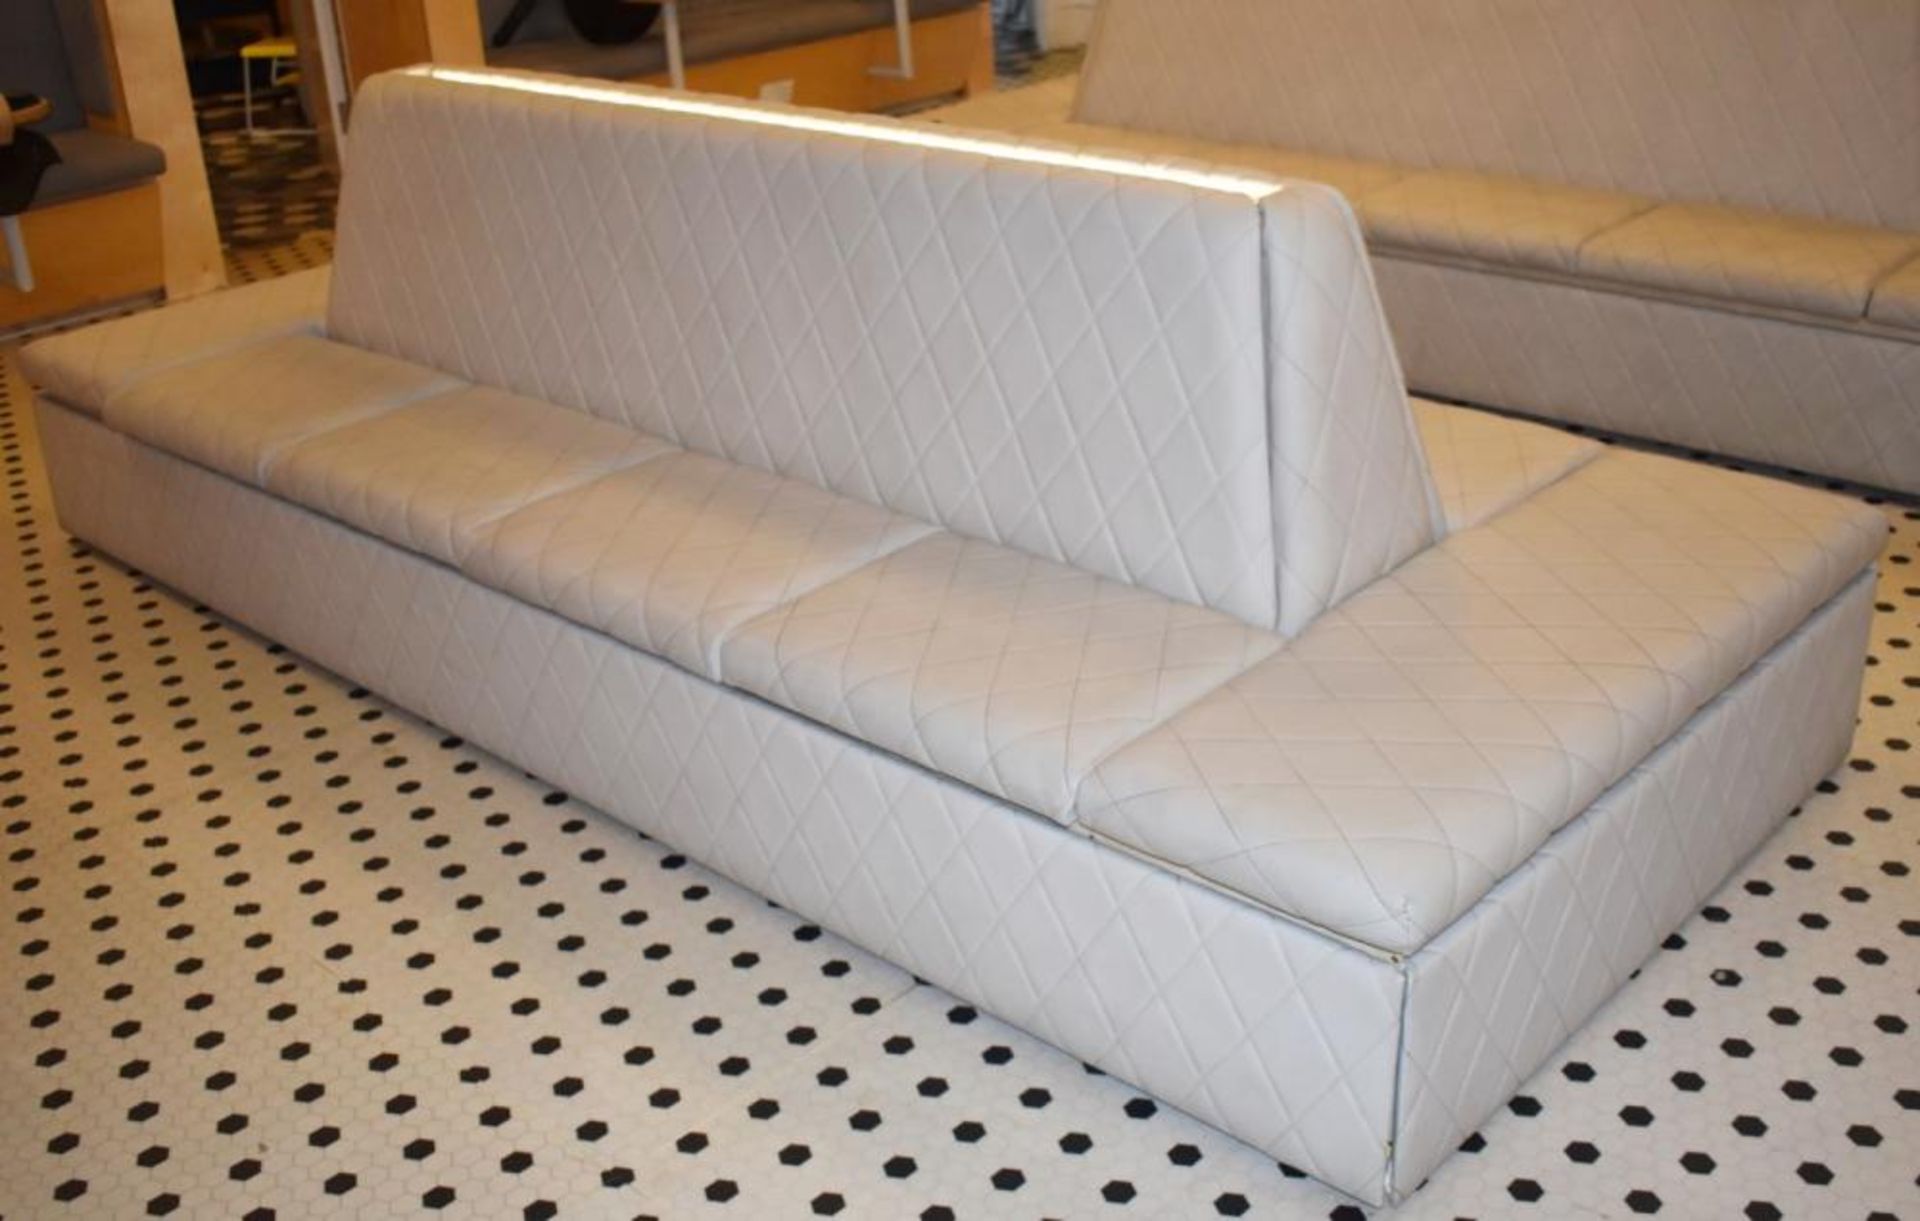 1 x Central Seating Banquette in a Contemporary Diamond Faux Grey Leather - Quality Build With Under